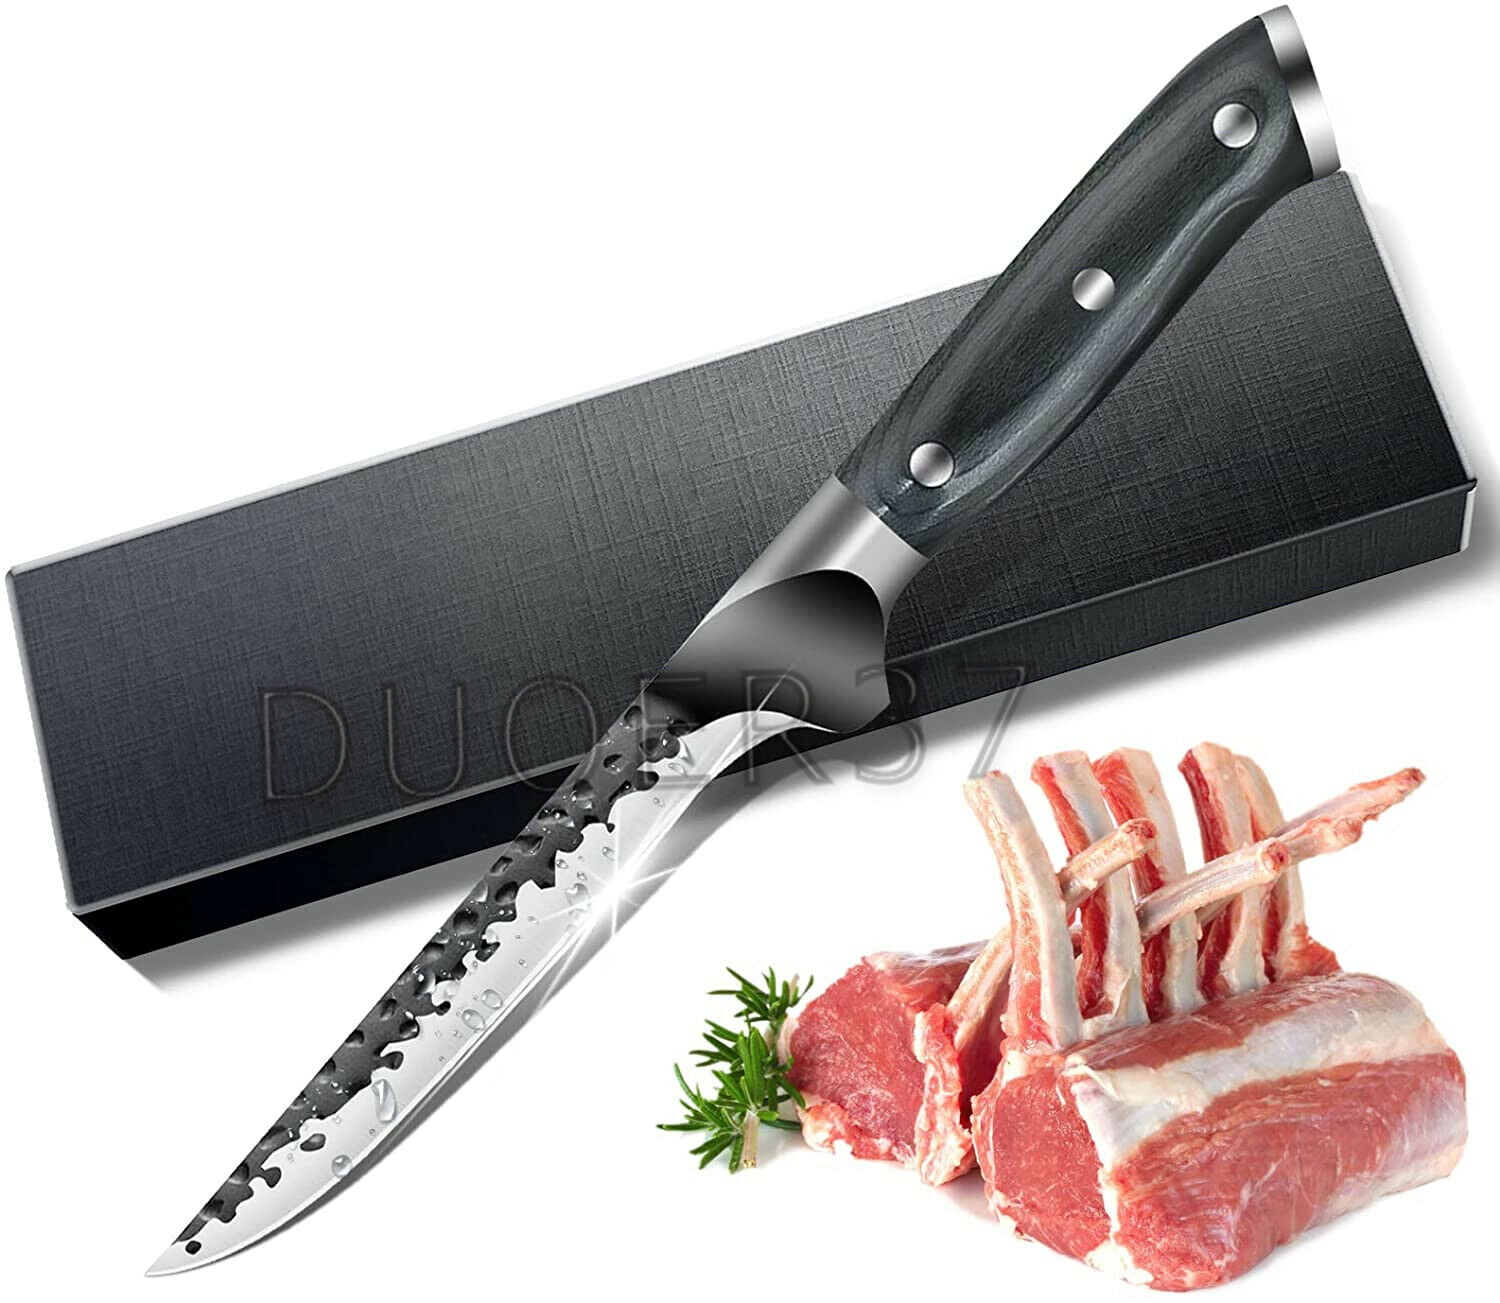 Boning Knife, 5cr15 Stainless Steel Handmade Boning Knife Fish knife Sharp  Meat Cleaver Butcher Knife Chef Knife Kitchen Cooking Knives BY ZZYY (Color